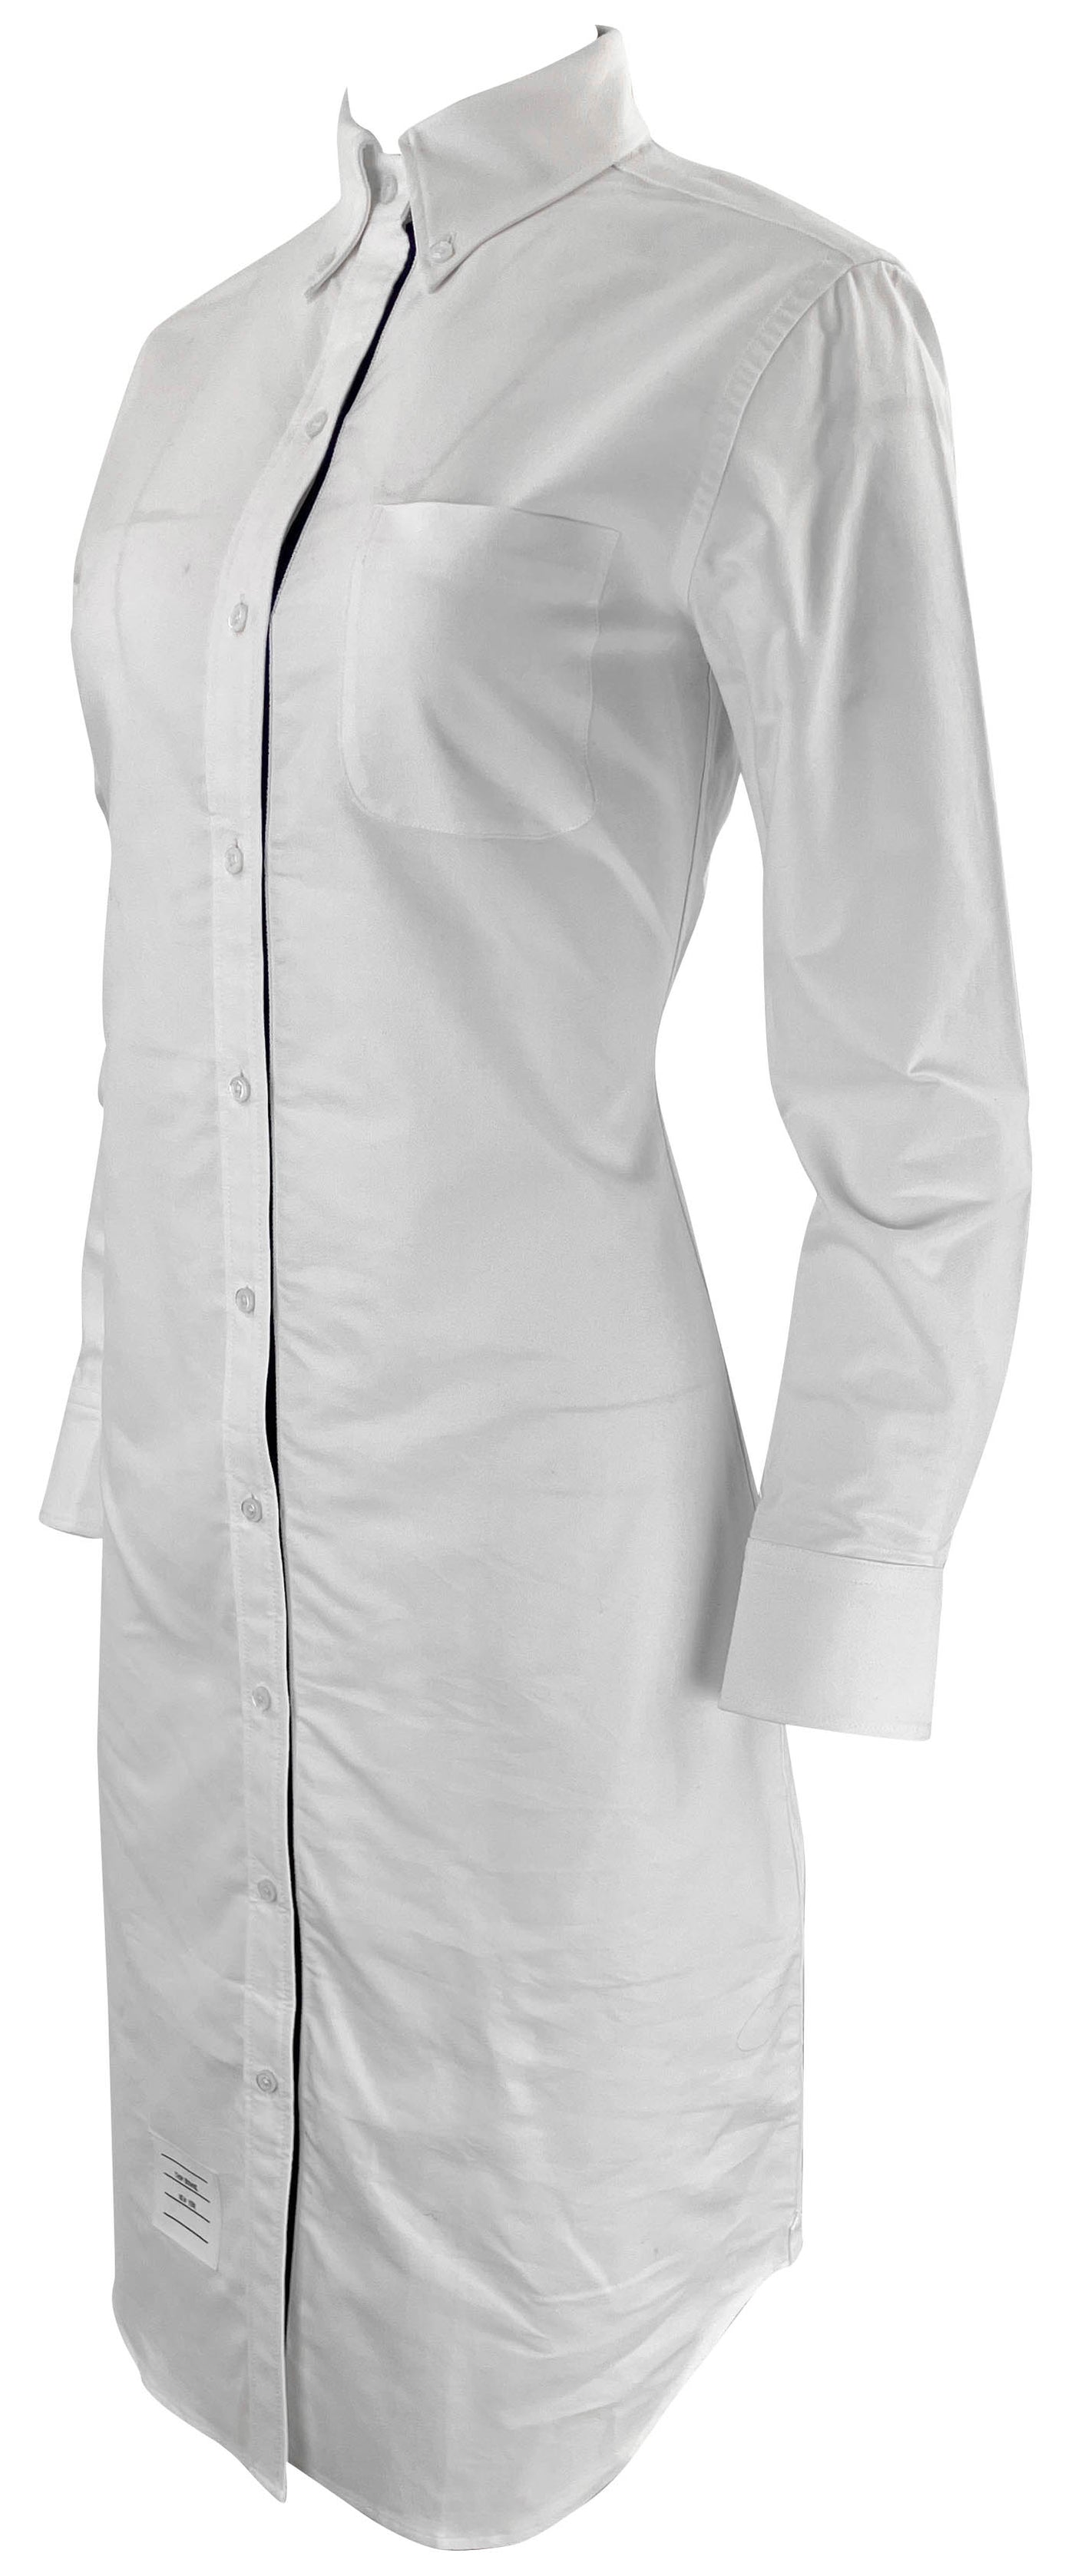 Thom Browne. Oxford Classic Shirt-Dress in White - Discounts on Thom Browne. at UAL